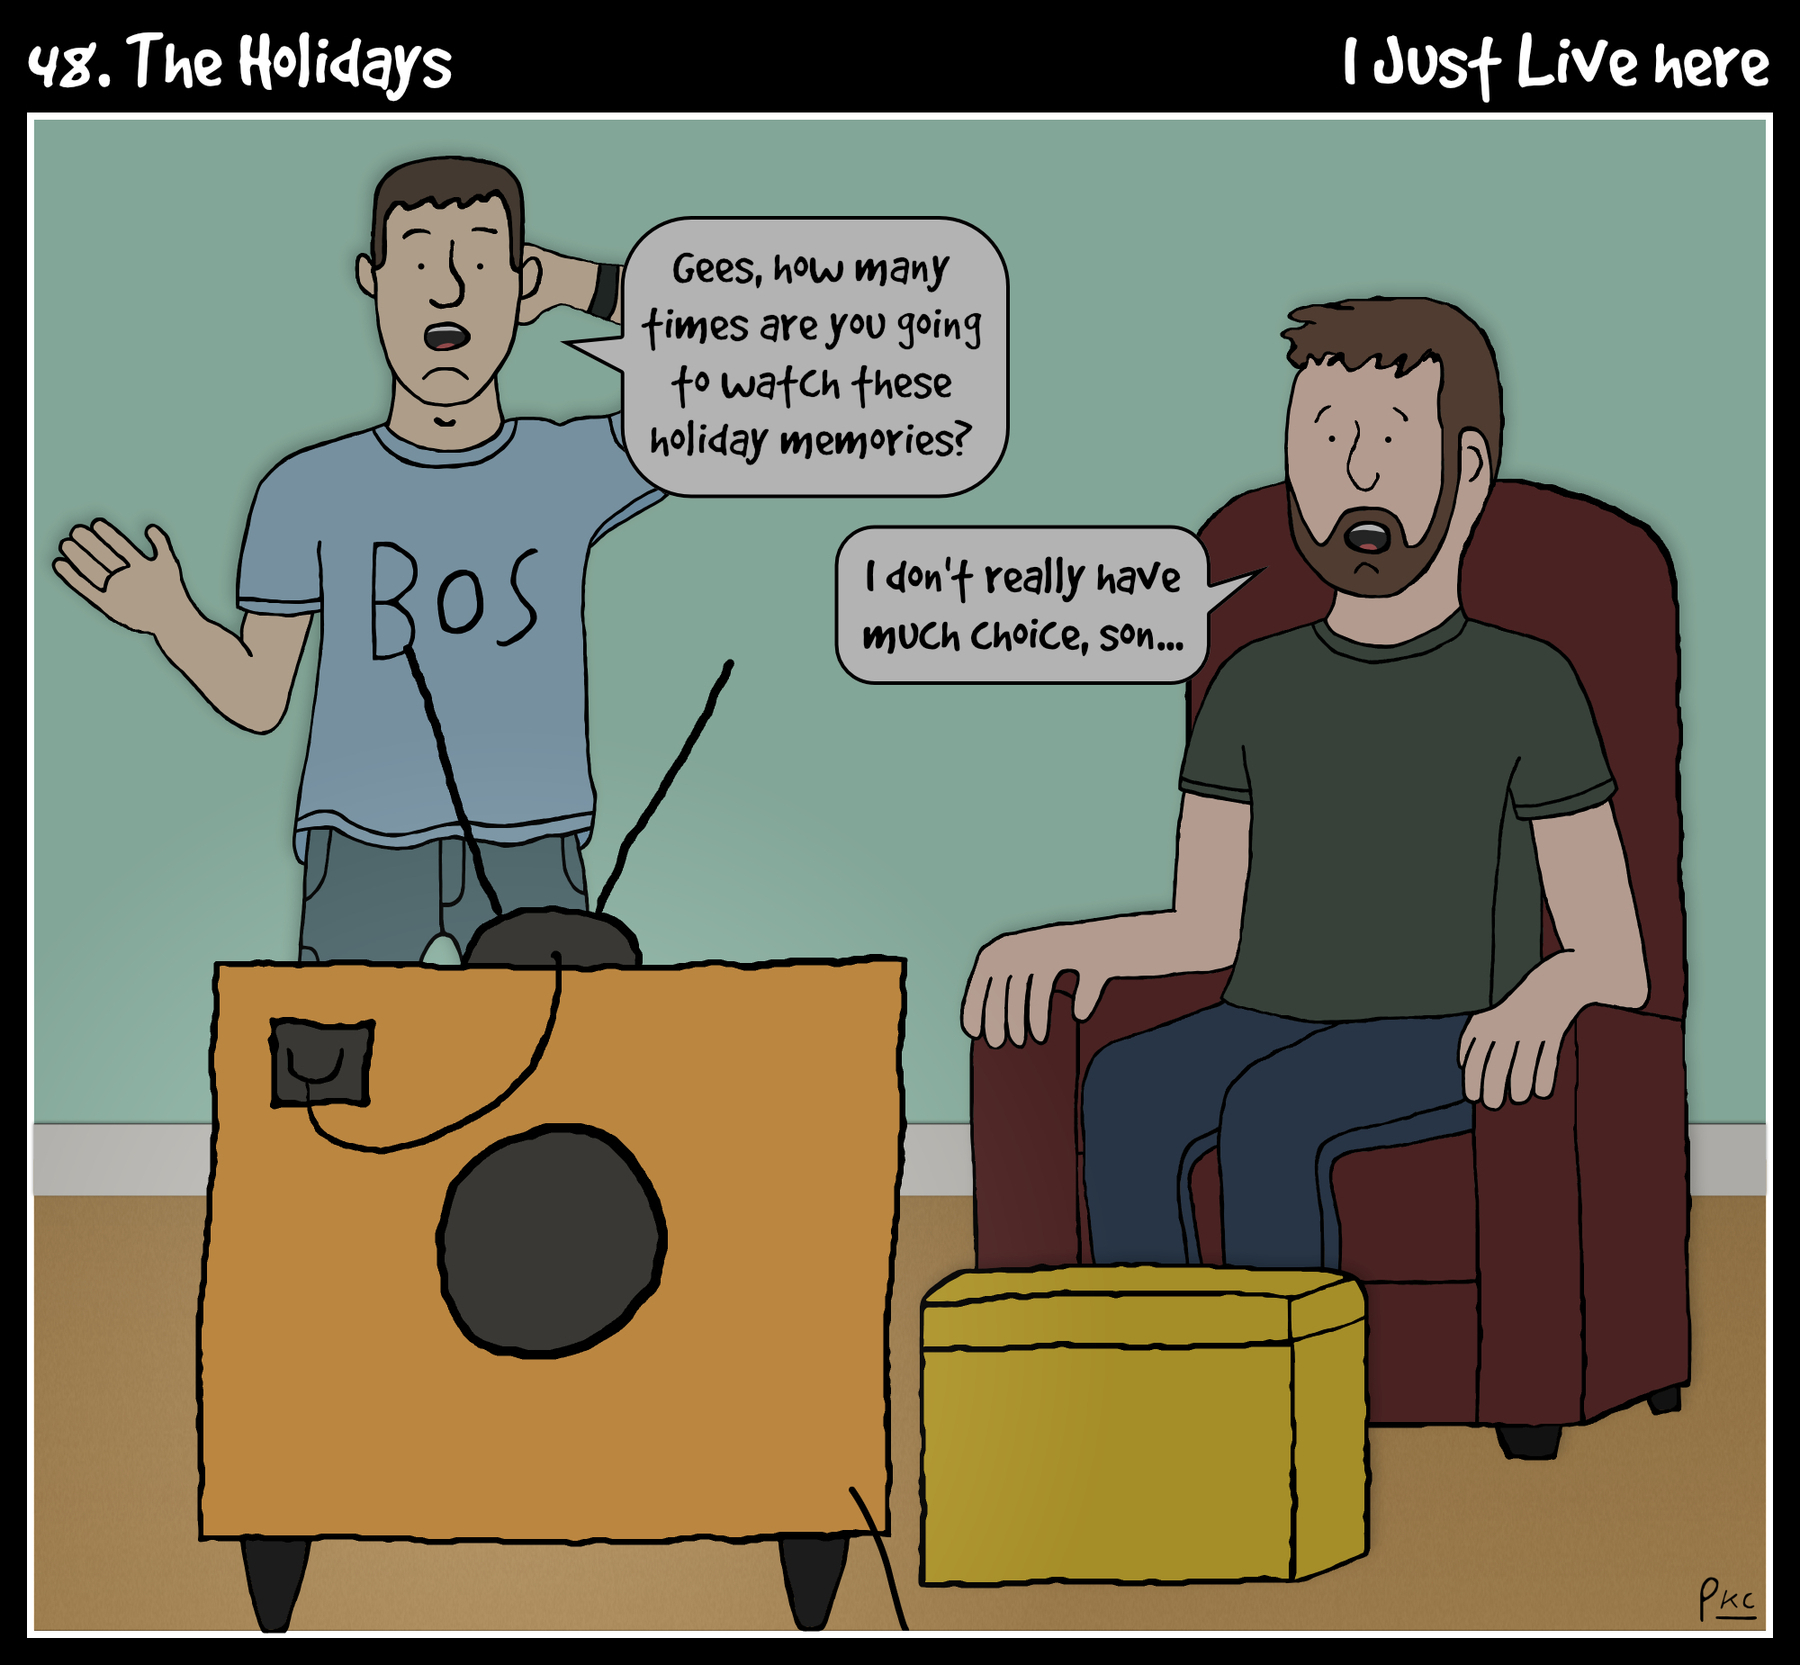 48. The Holidays. Man and boy in a darkened living room, looking at an old-fashioned TV. Boy says gees, how many times are you going to watch these holiday memories? Man replies I don't really have much choice, son...